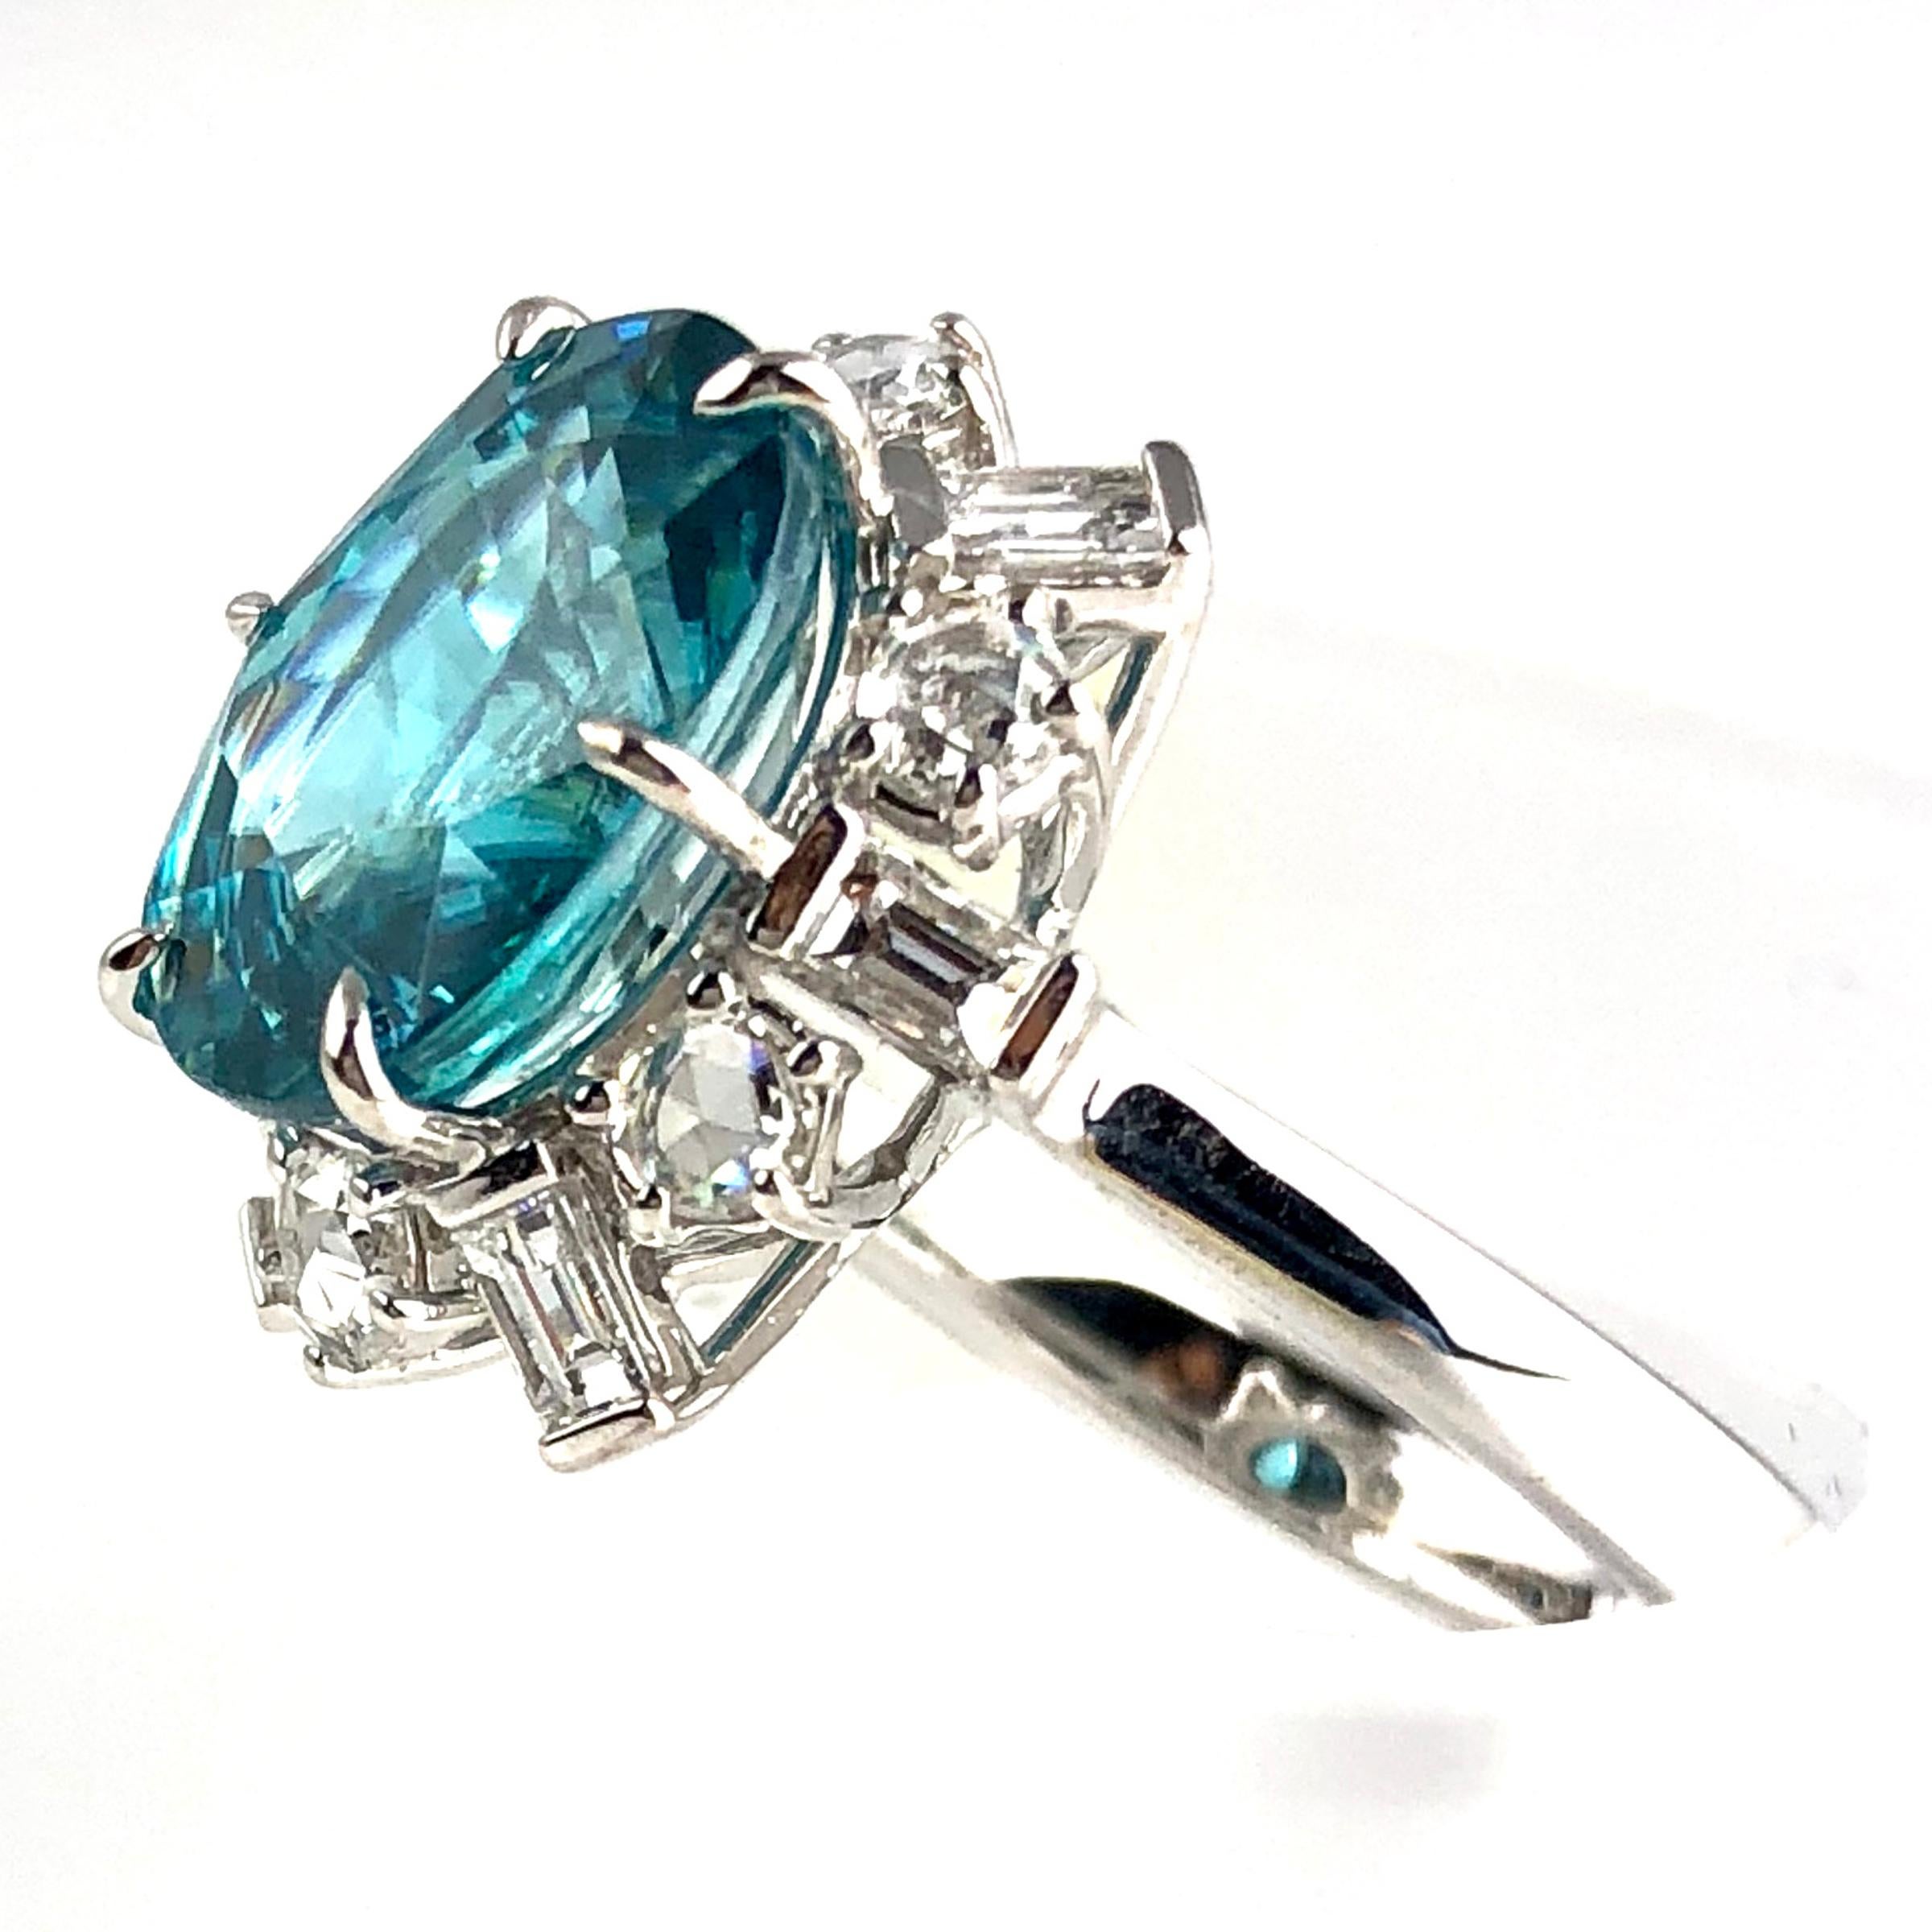 Contemporary GIA Certified 6.85 Carat Oval Cut Blue Zircon and Diamond Ring in 18W ref1313 For Sale